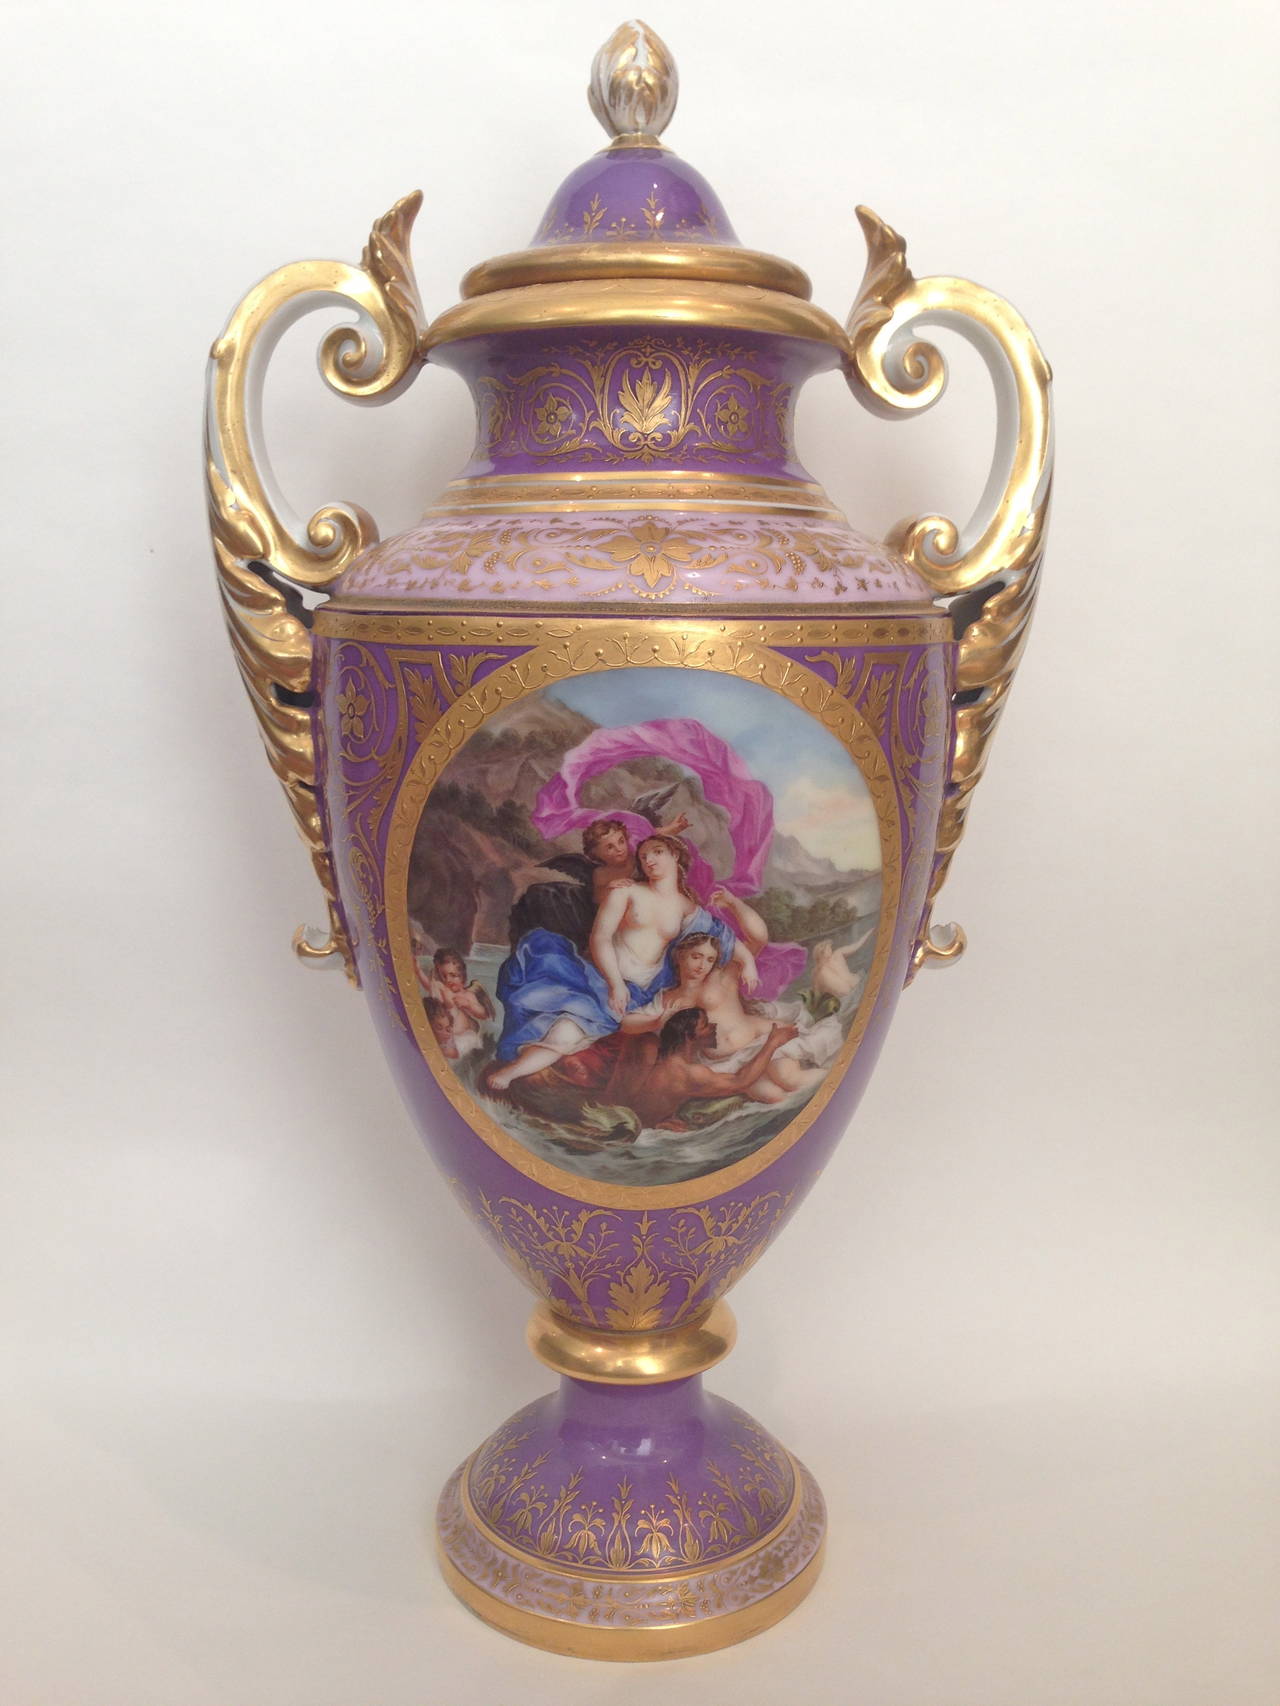 Gilt Extremely Rare Vienna Porcelain Covered Urns Fantastic Color, 19th Century For Sale